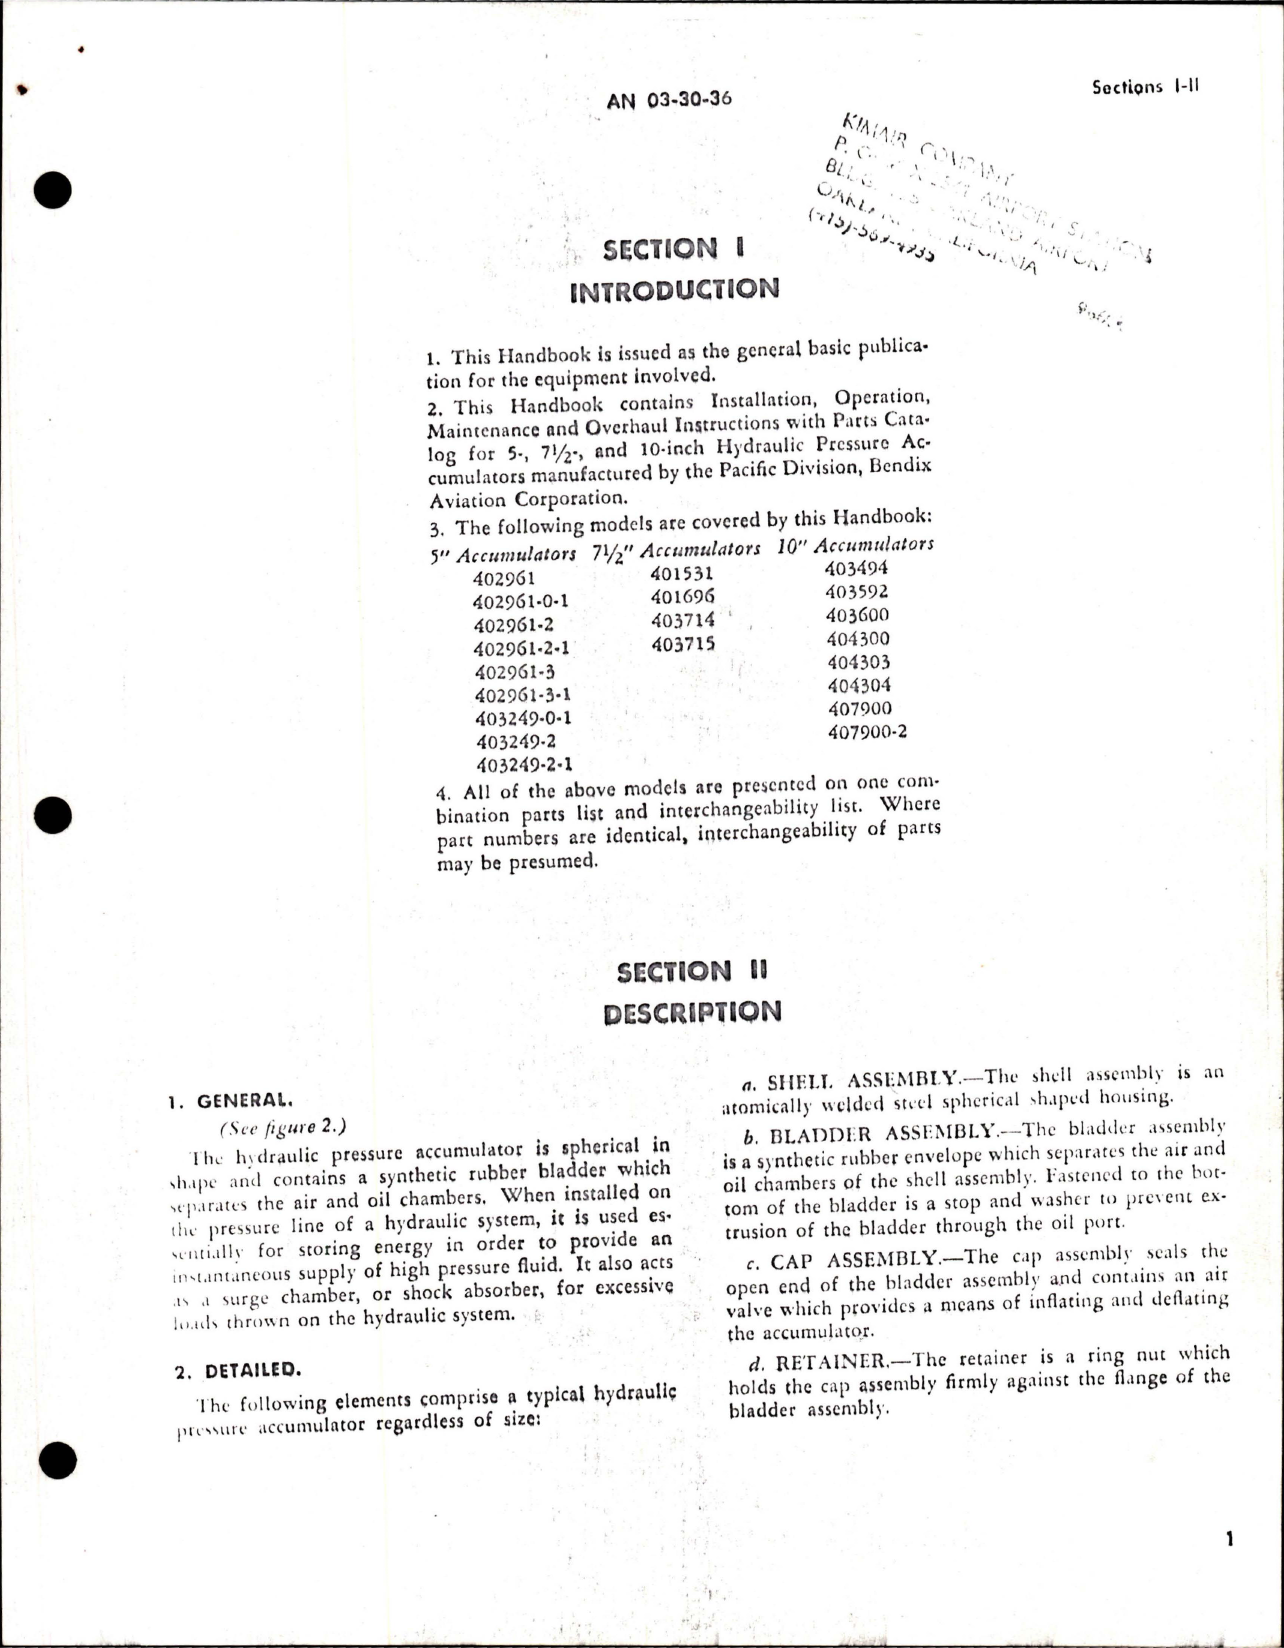 Sample page 7 from AirCorps Library document: Operation, Service, Overhaul with Parts for Hydraulic Pressure Accumulators - 5, 7 1/2 and 10 inch 